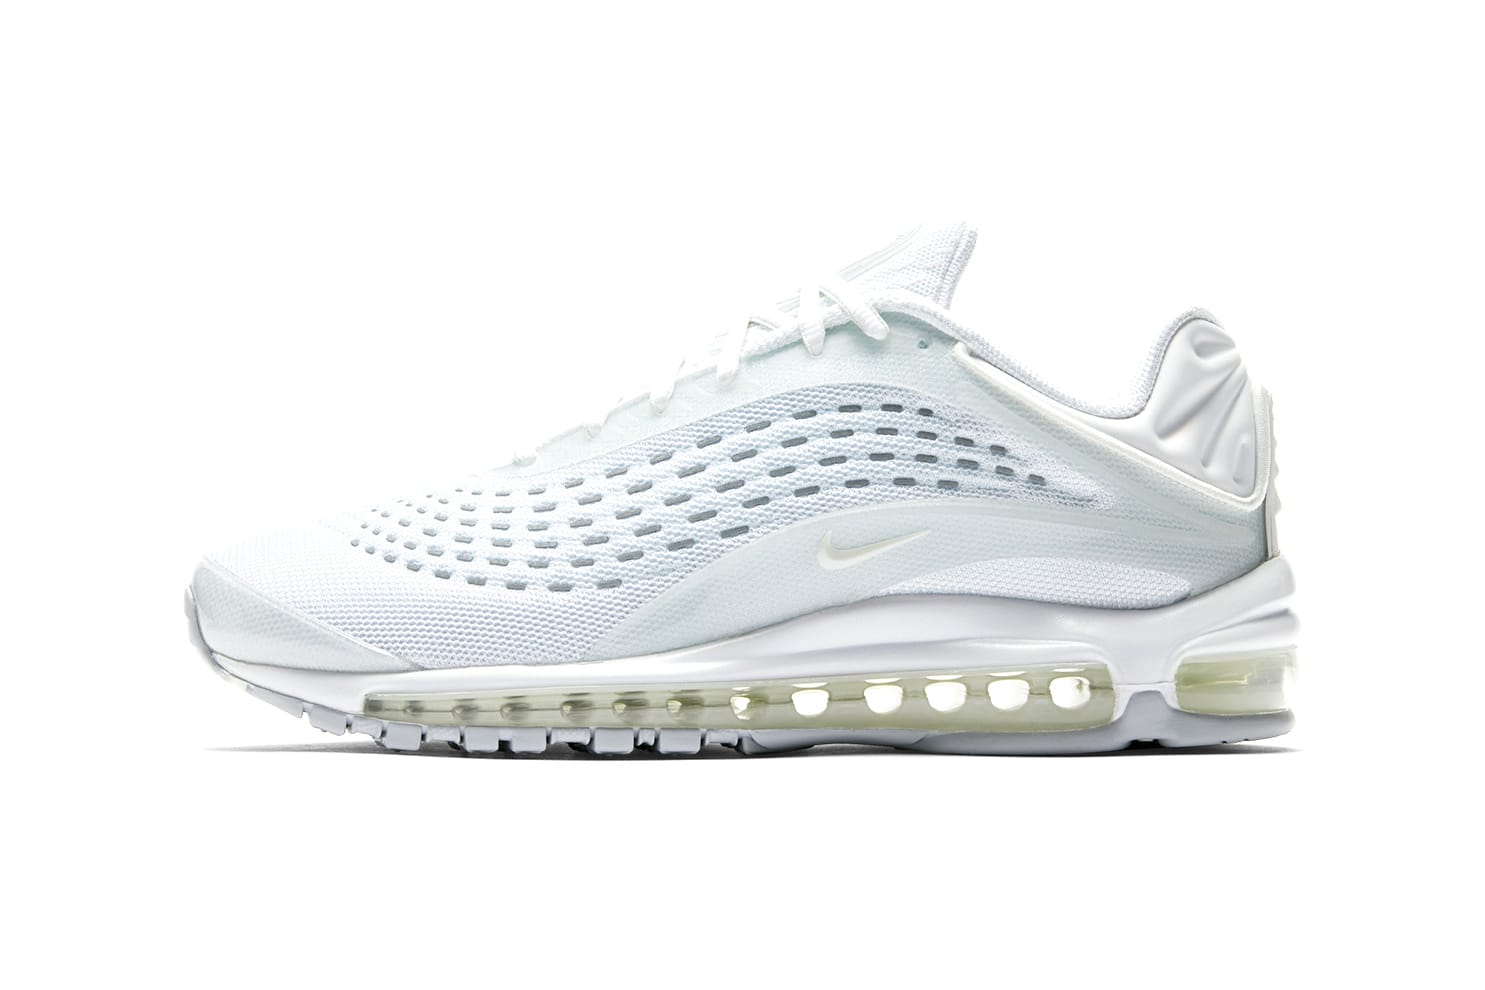 Nike Air Max Deluxe in Triple White 